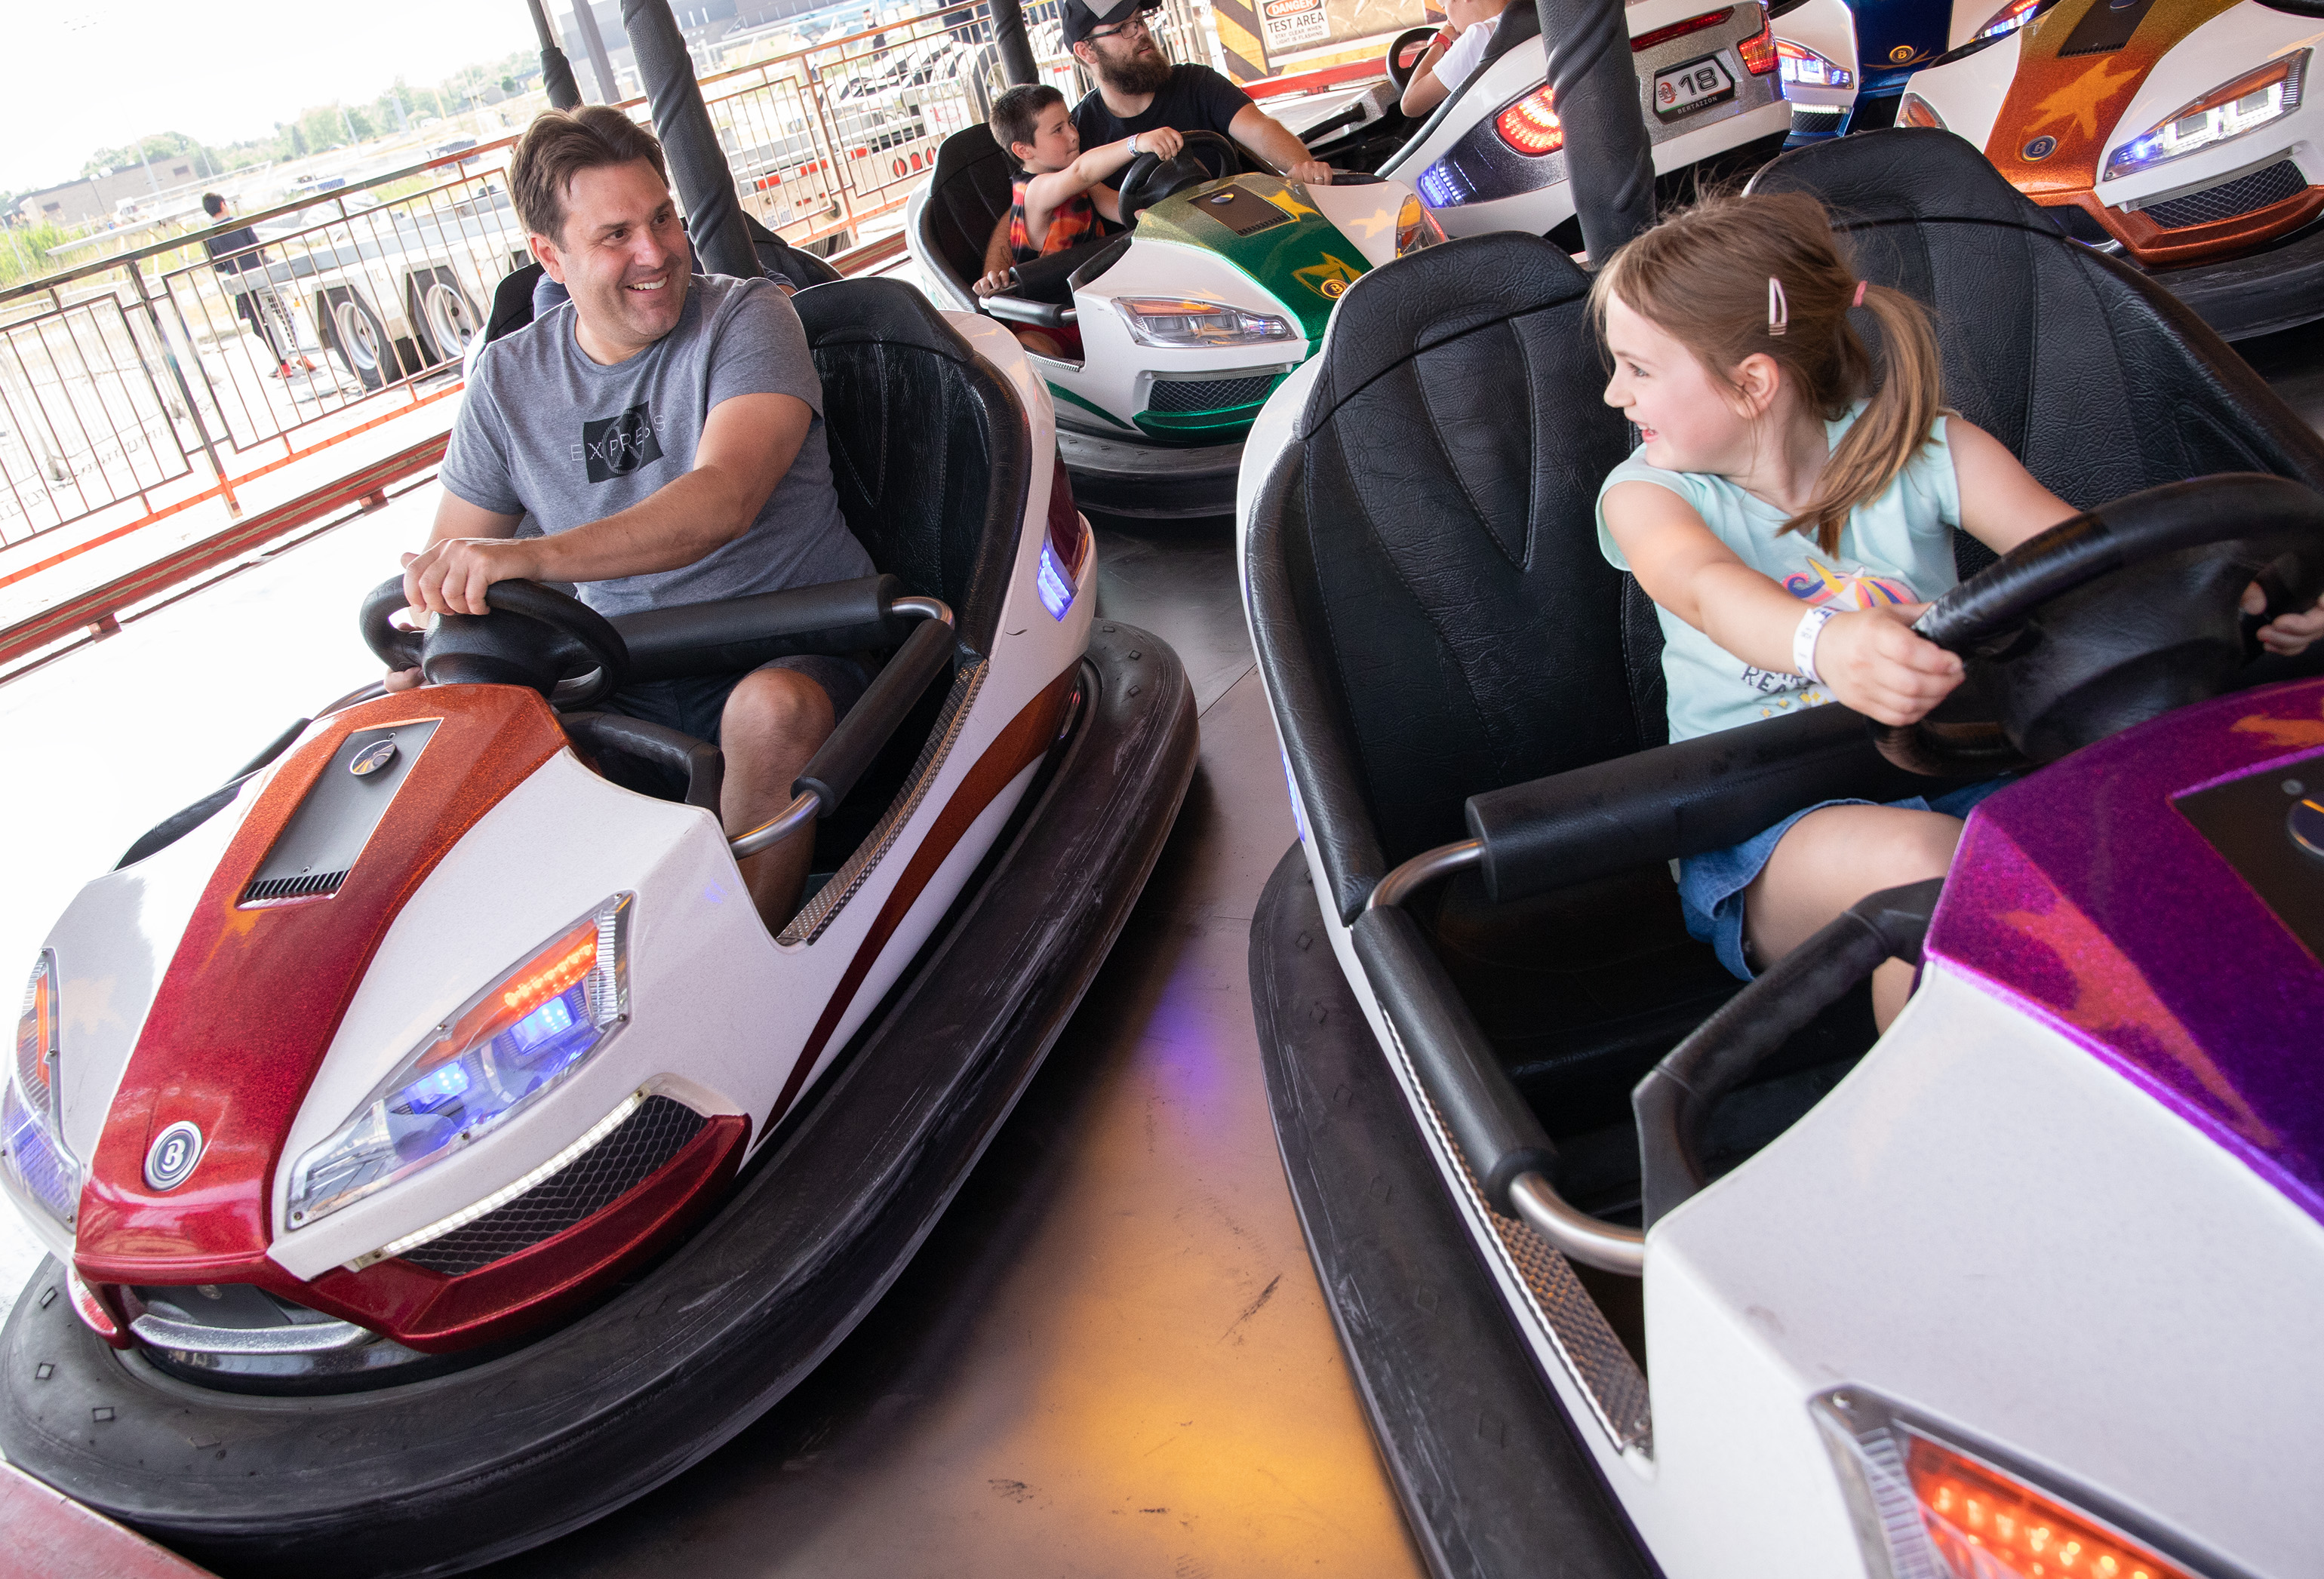 The 17 Top Amusement Parks in the U.S. for 2023